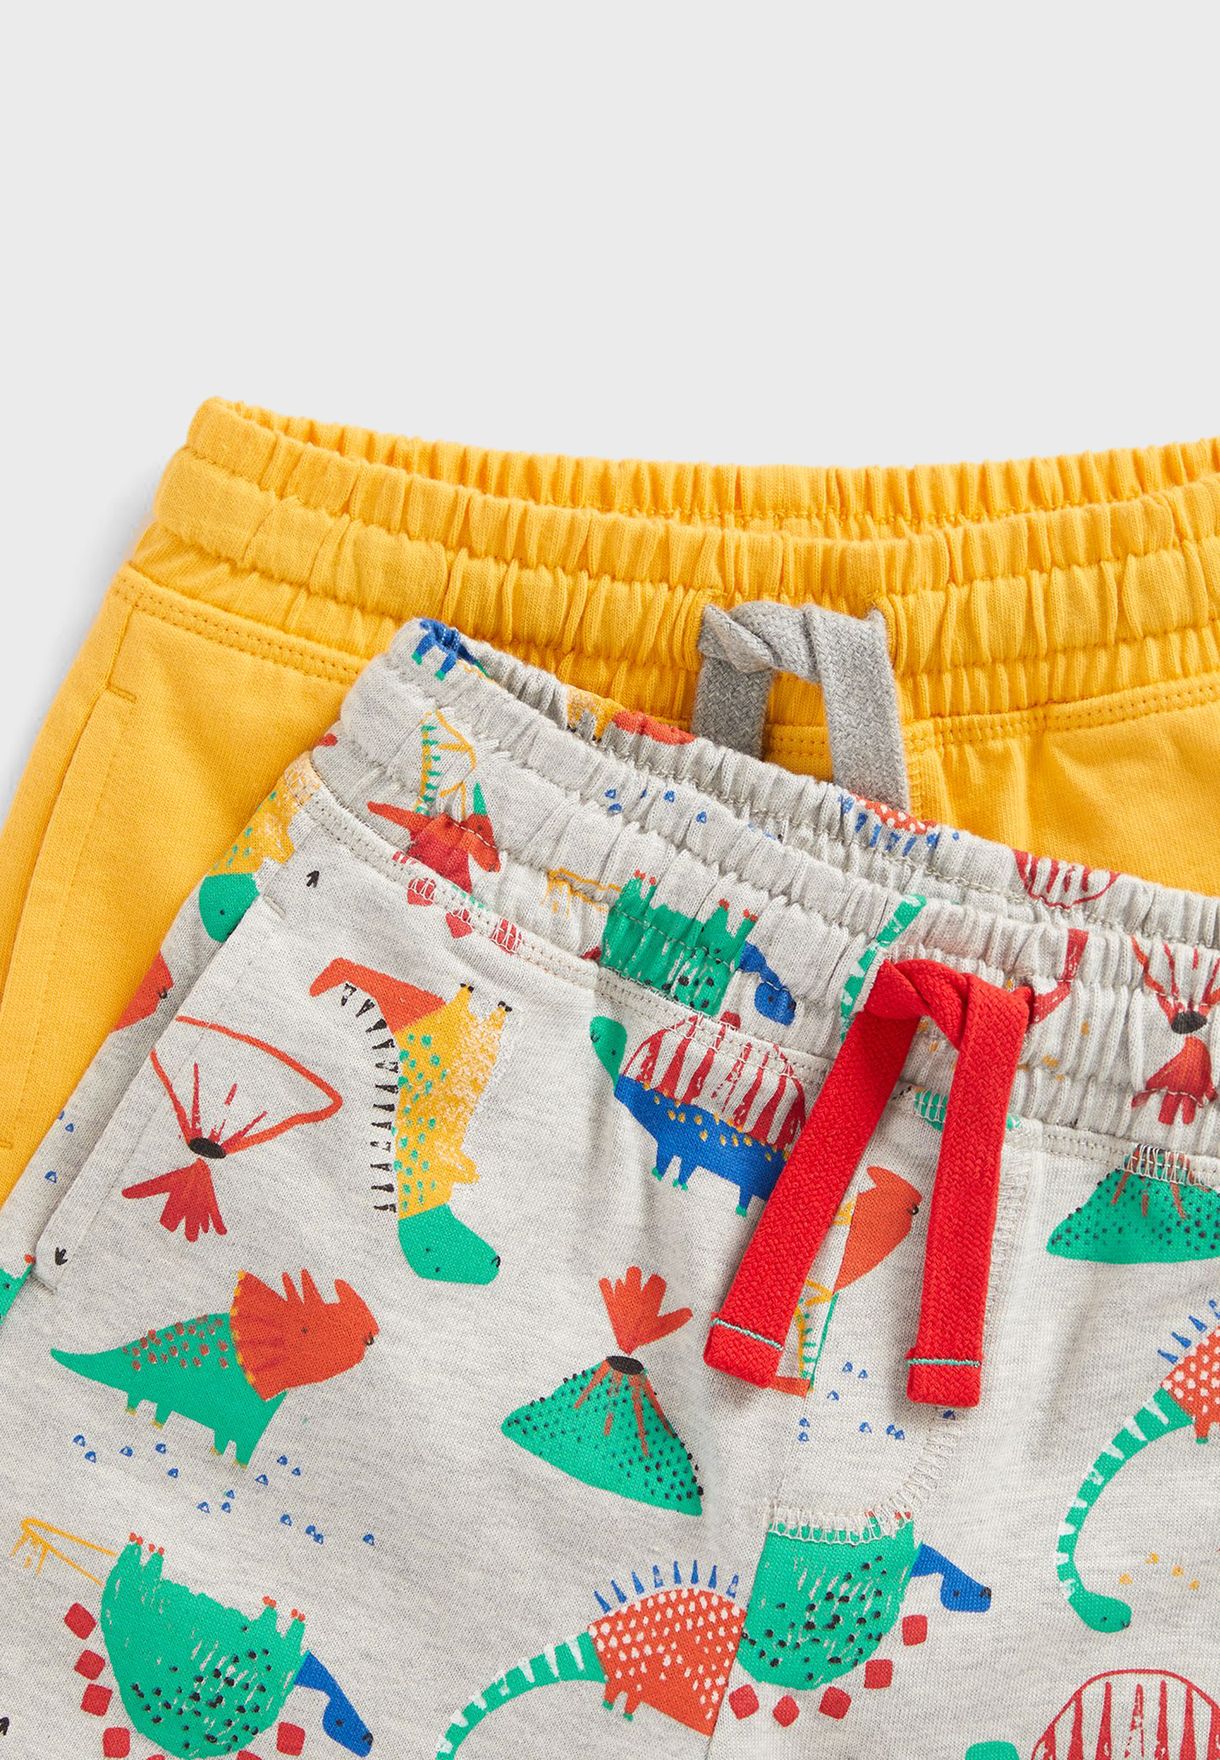 Infant 3 Pack Assorted Shorts